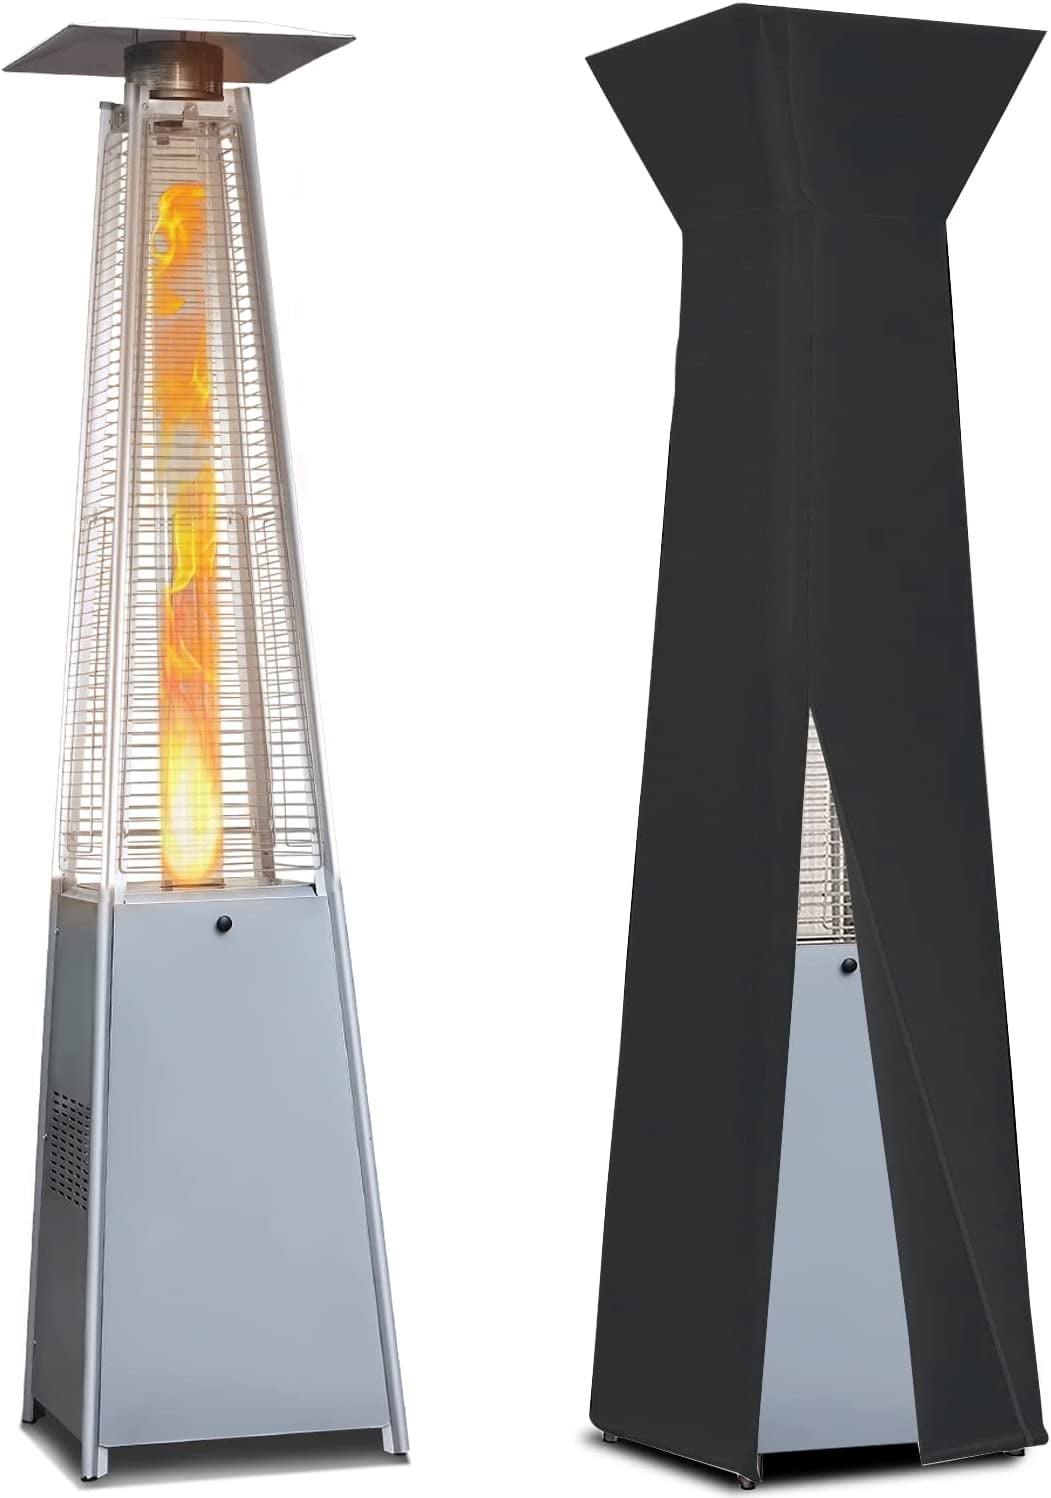 Pamapic 42000 BTU Pyramid Outdoor Patio Heater with Cover,Rapid Heating Propane Heater,New Rattan Design Heater with Wheels for Patio,Garden,Courtyard,Balcony 